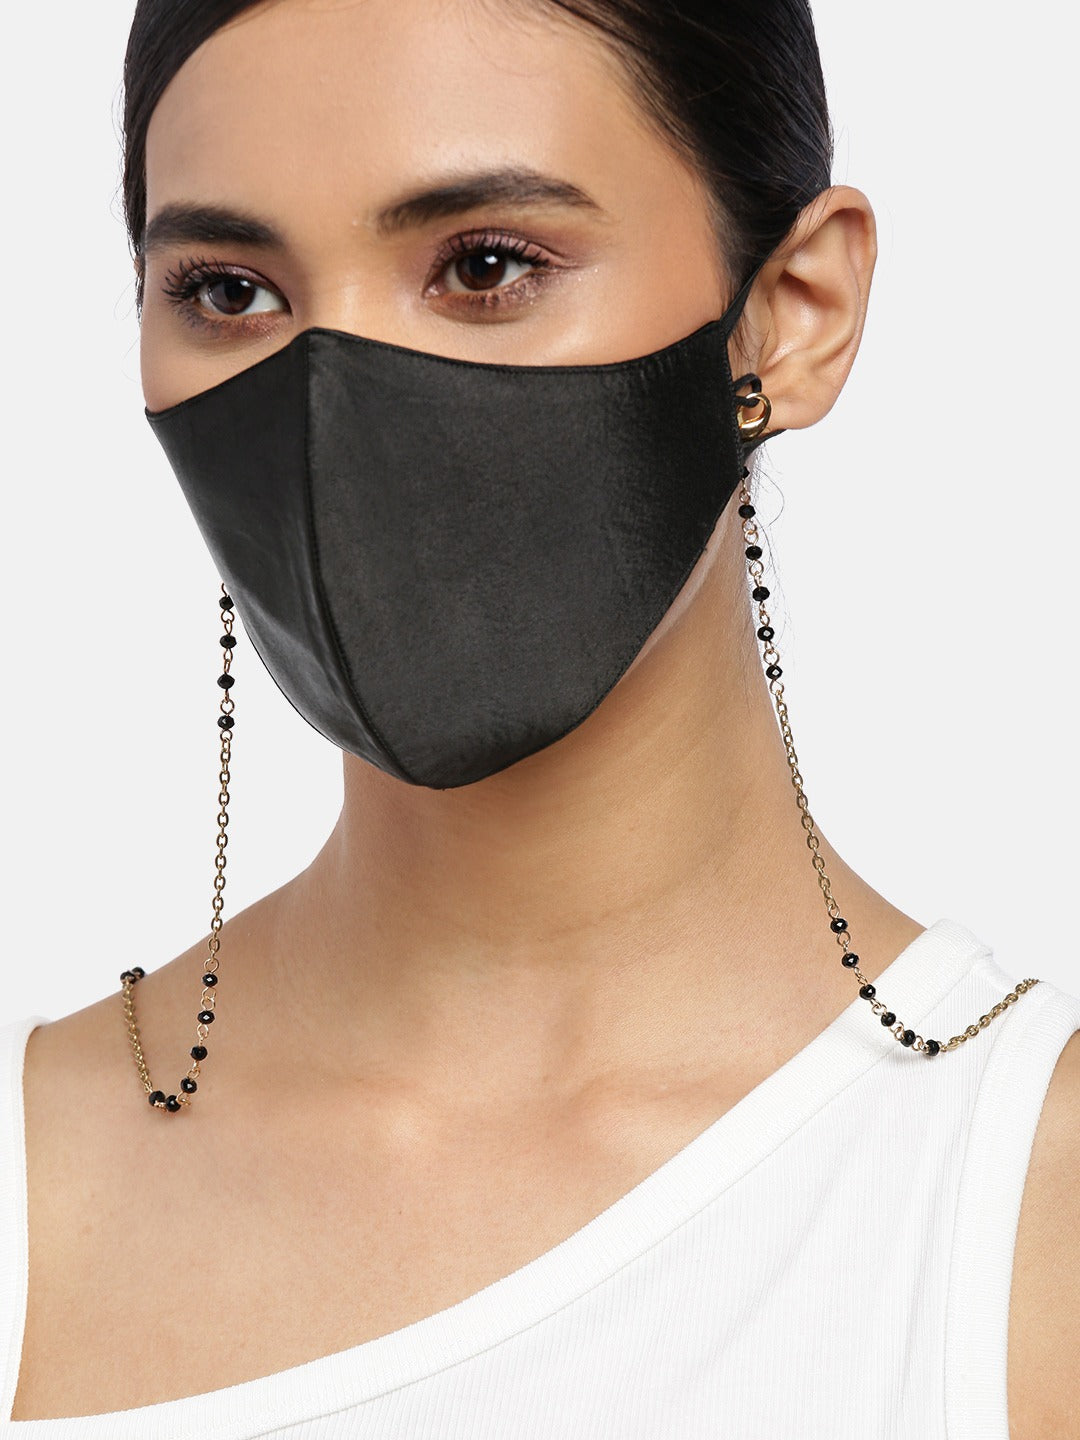 Blueberry black Reusable 2-Ply satin face mask with gold plated chain